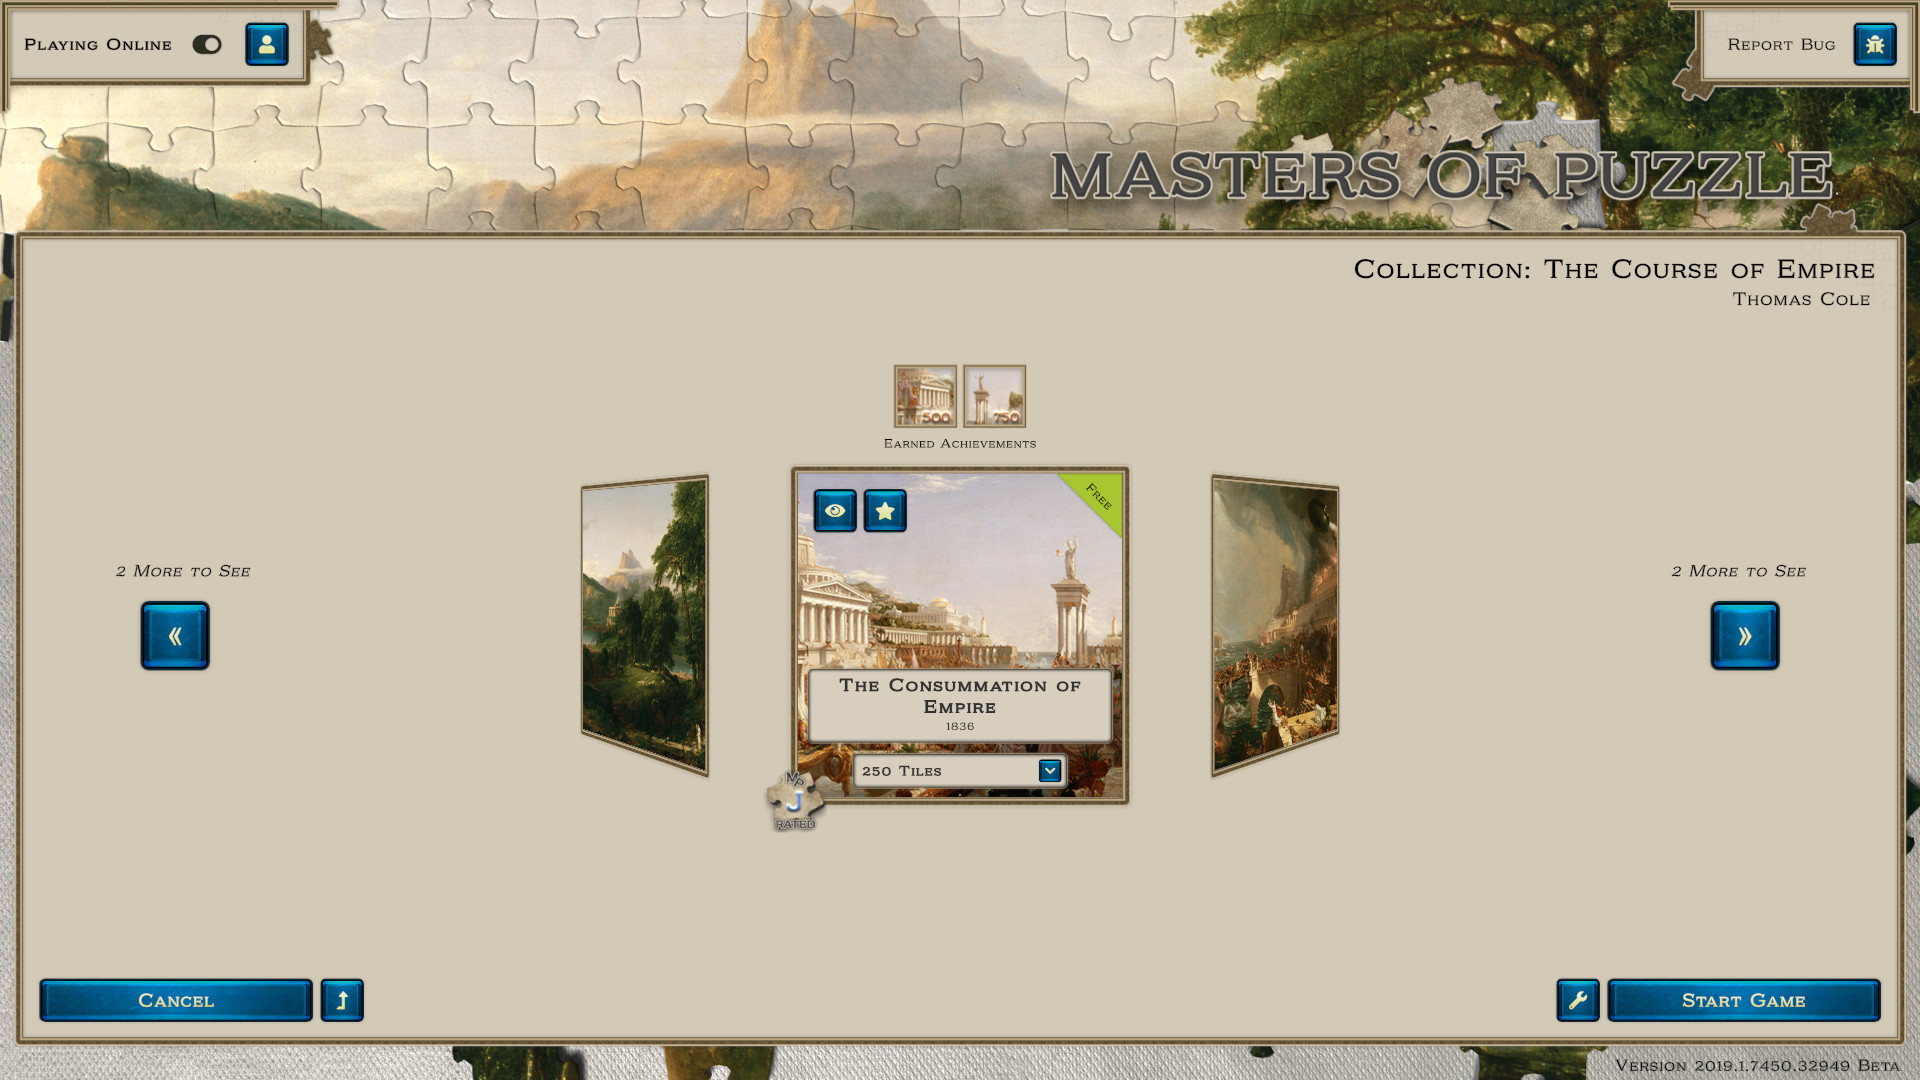 Masters of Puzzle Free Download